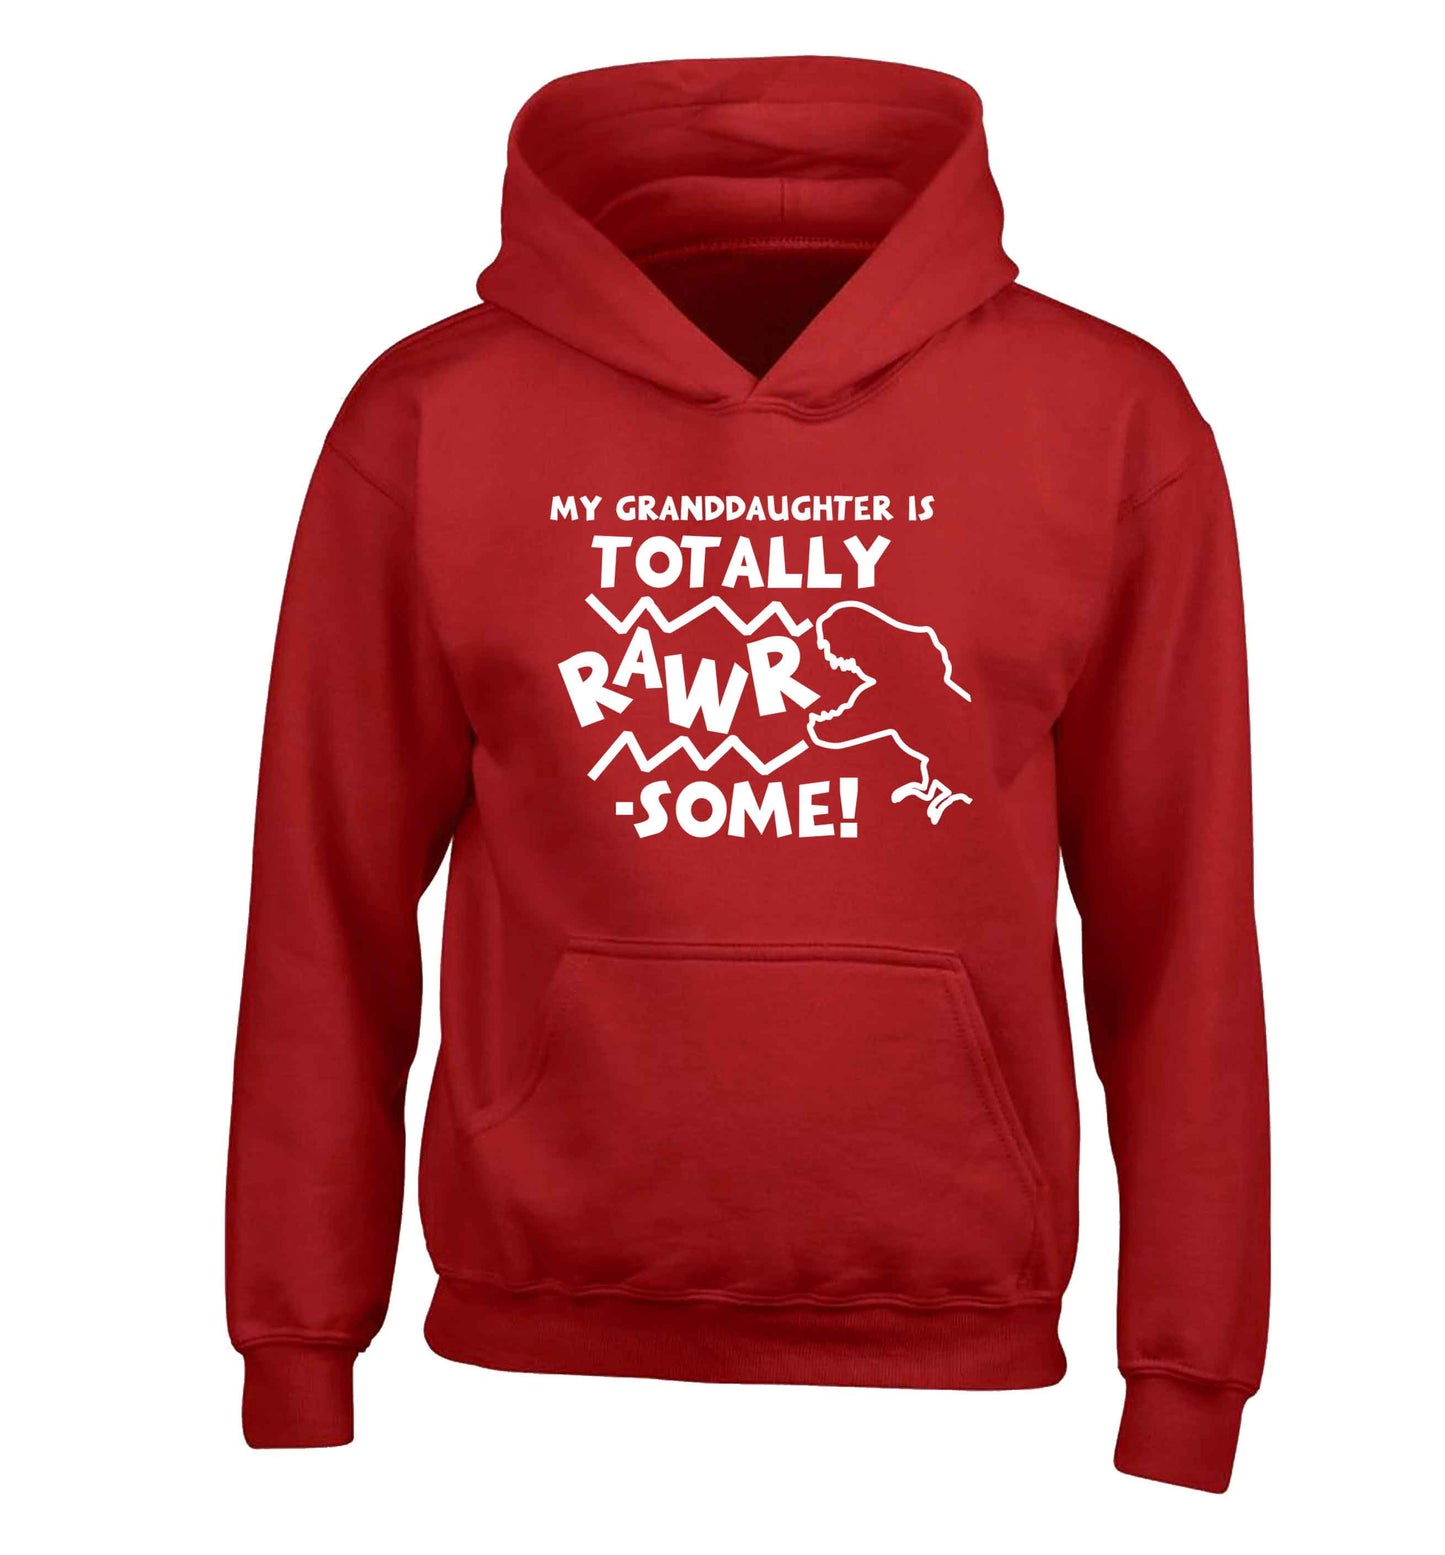 My granddaughter is totally rawrsome children's red hoodie 12-13 Years